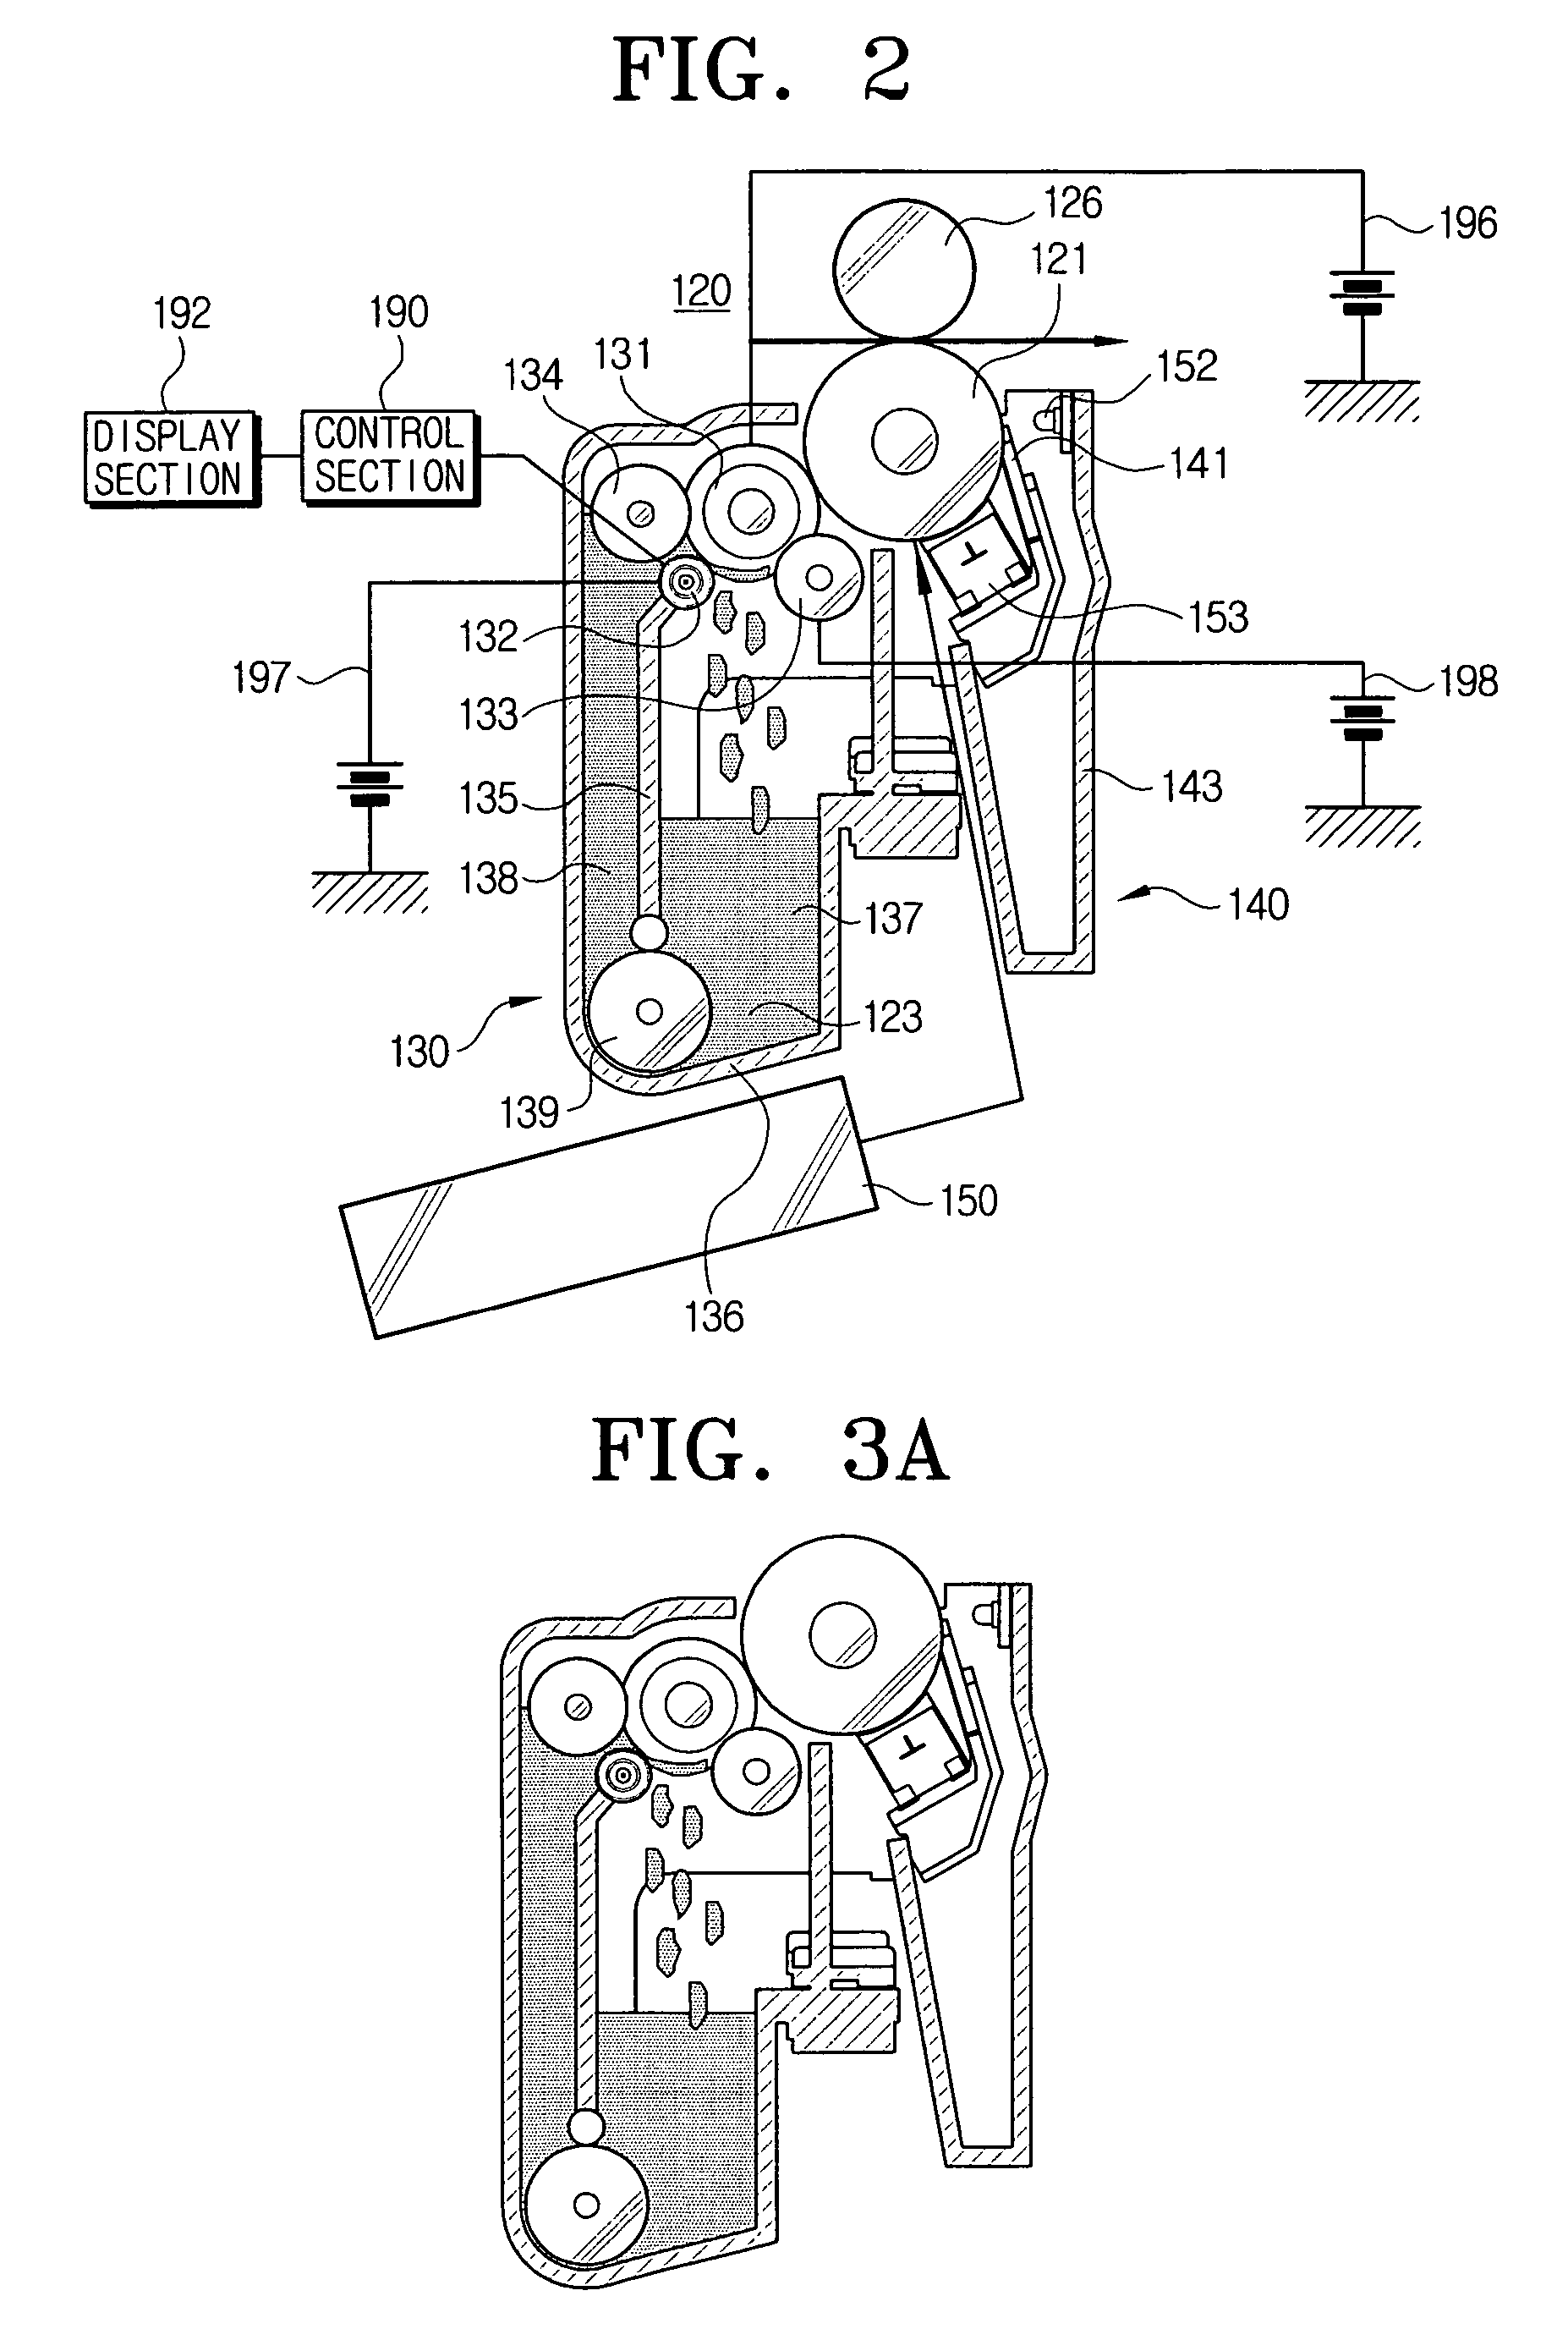 Wet electrophotographic image forming machine and method for recognizing a use life of a development cartridge used therein